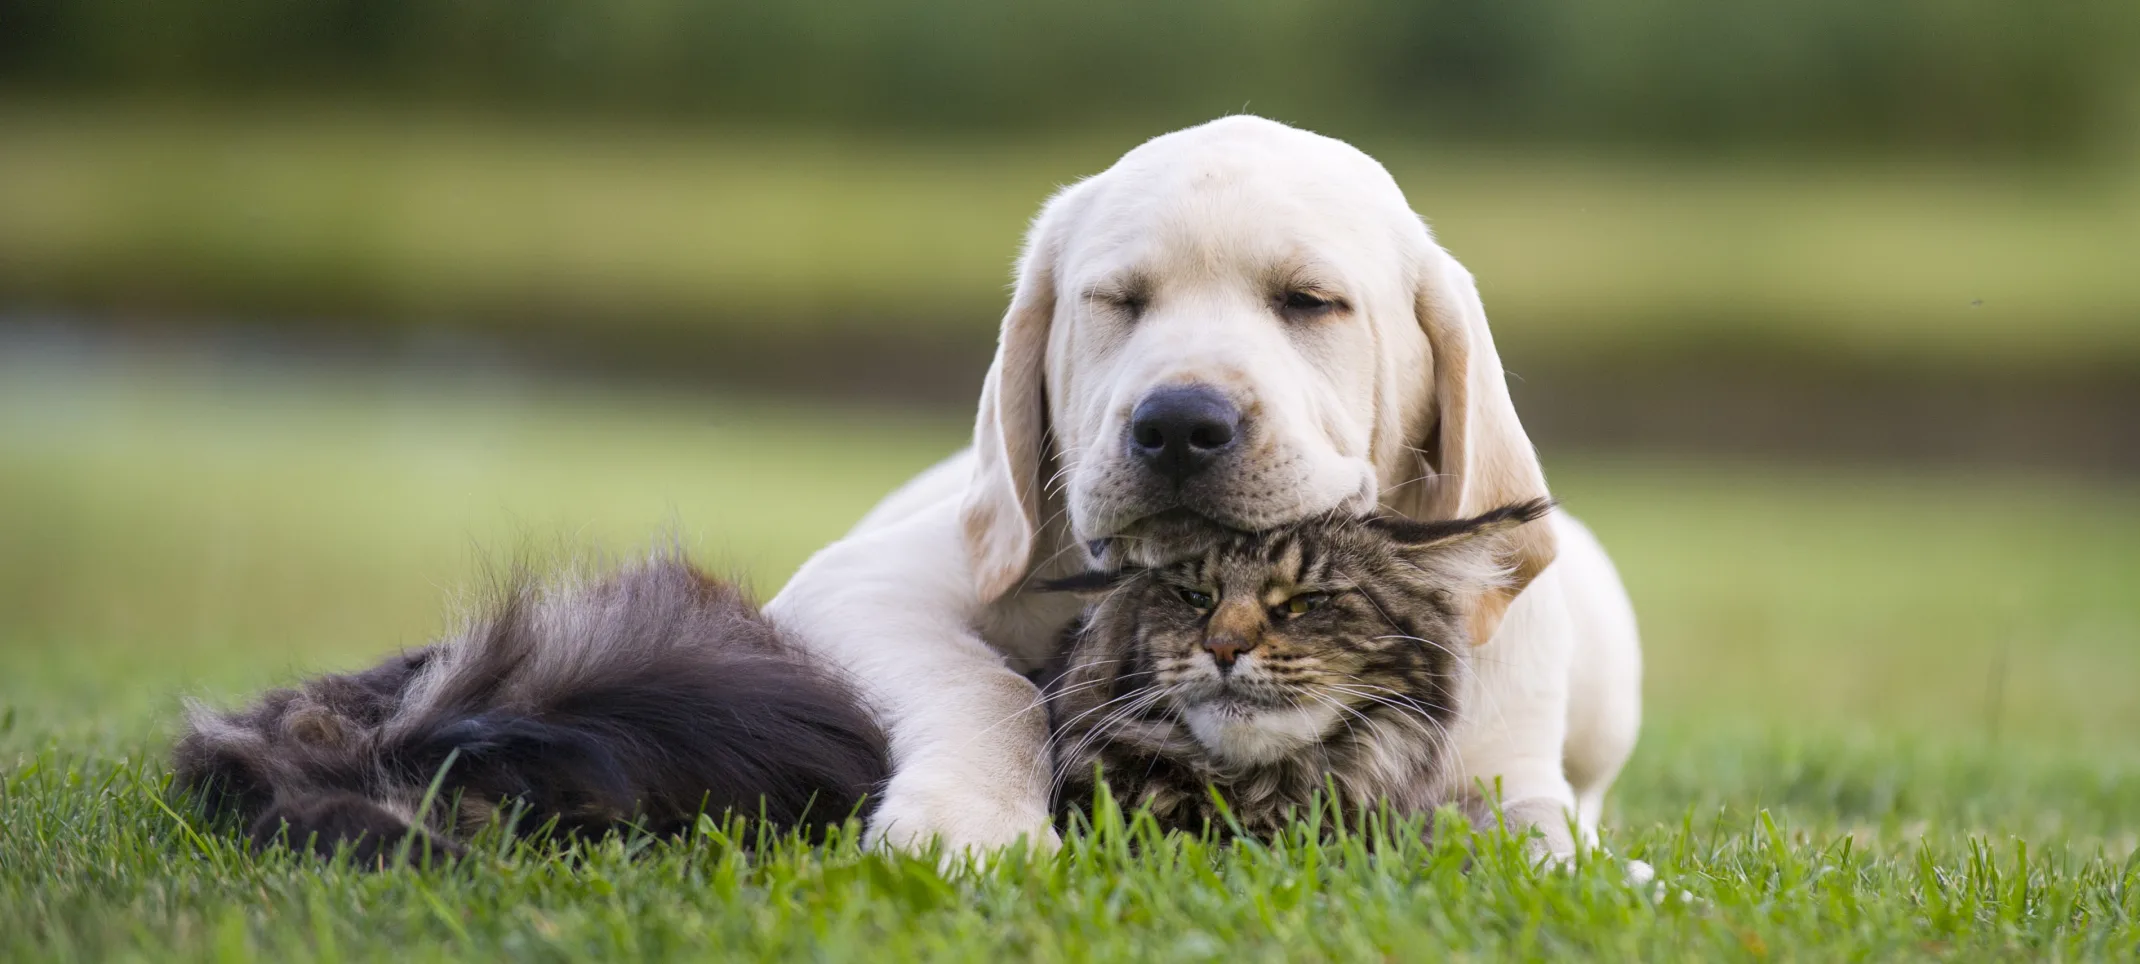 dog and cat sleeping in a grassy field 